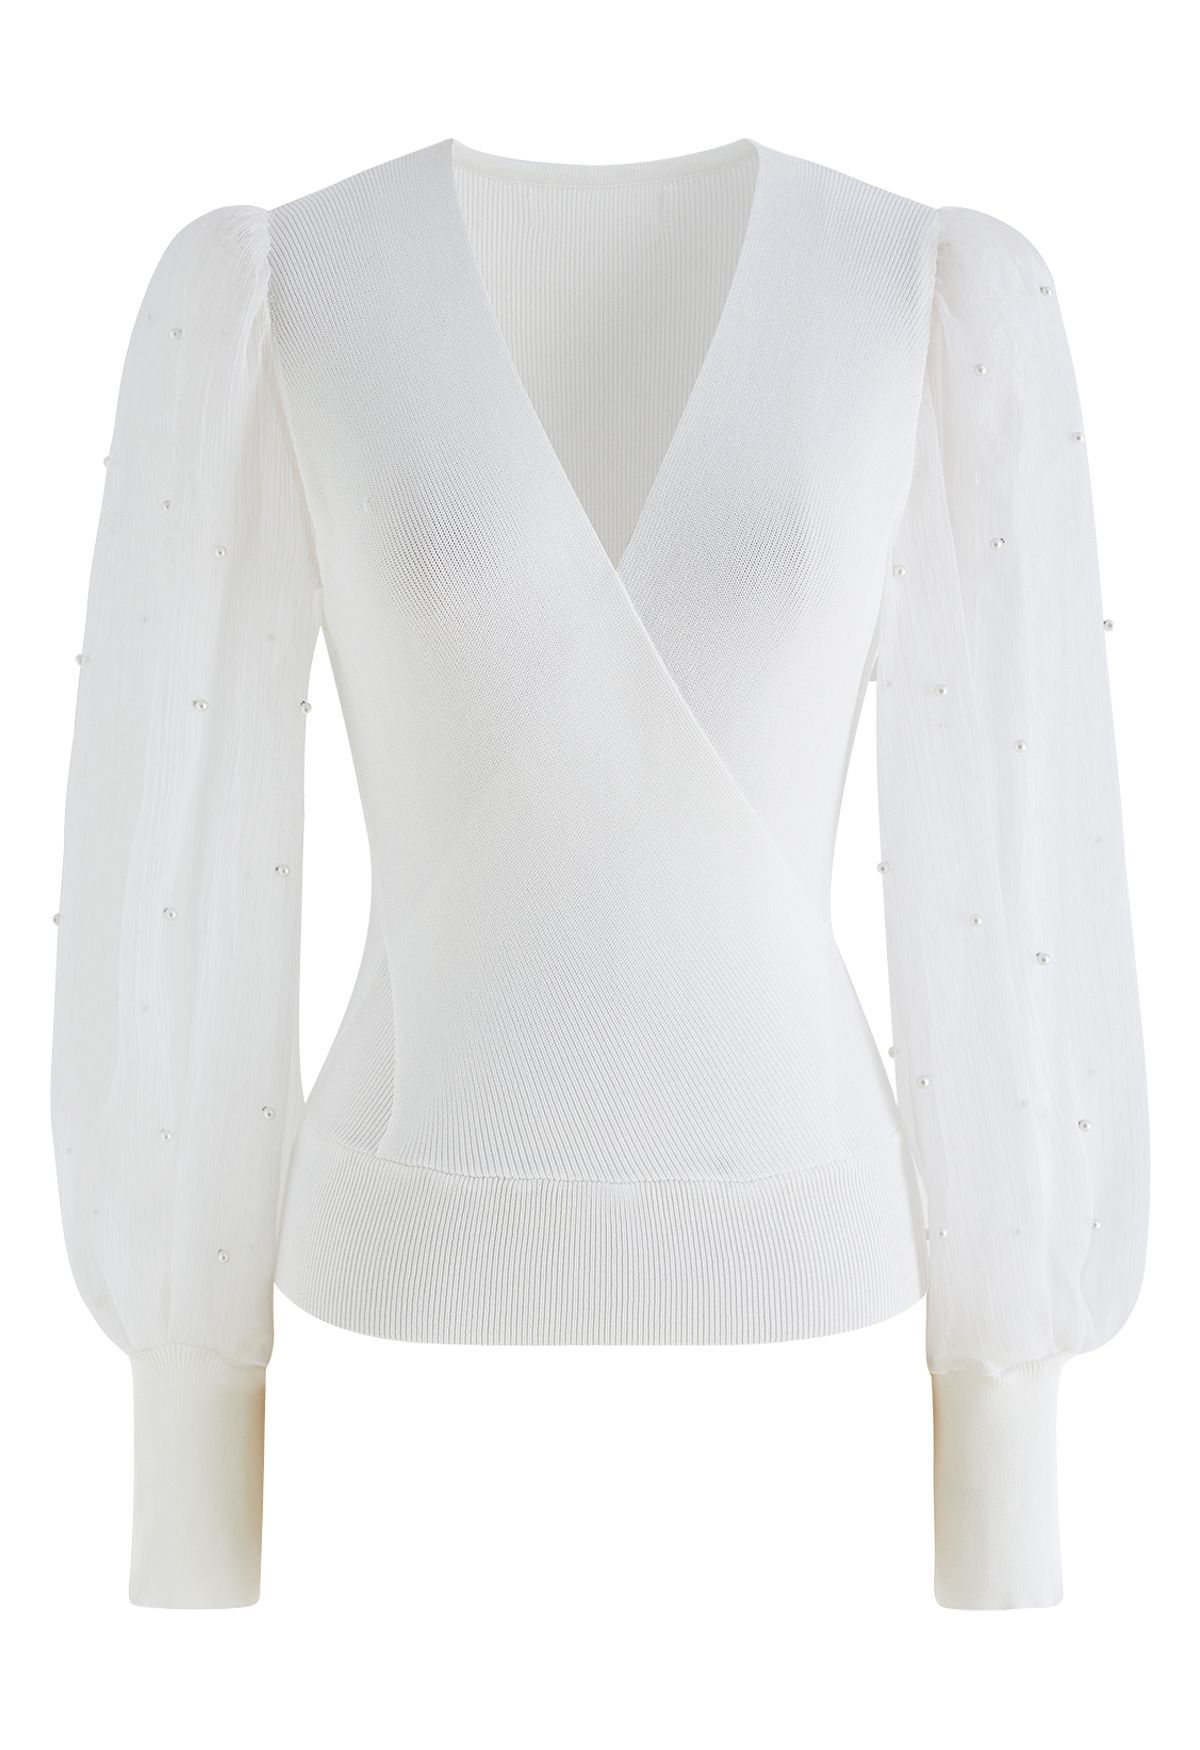 Pearl Puff Sleeve Spliced Faux-Wrap Top in White | Chicwish